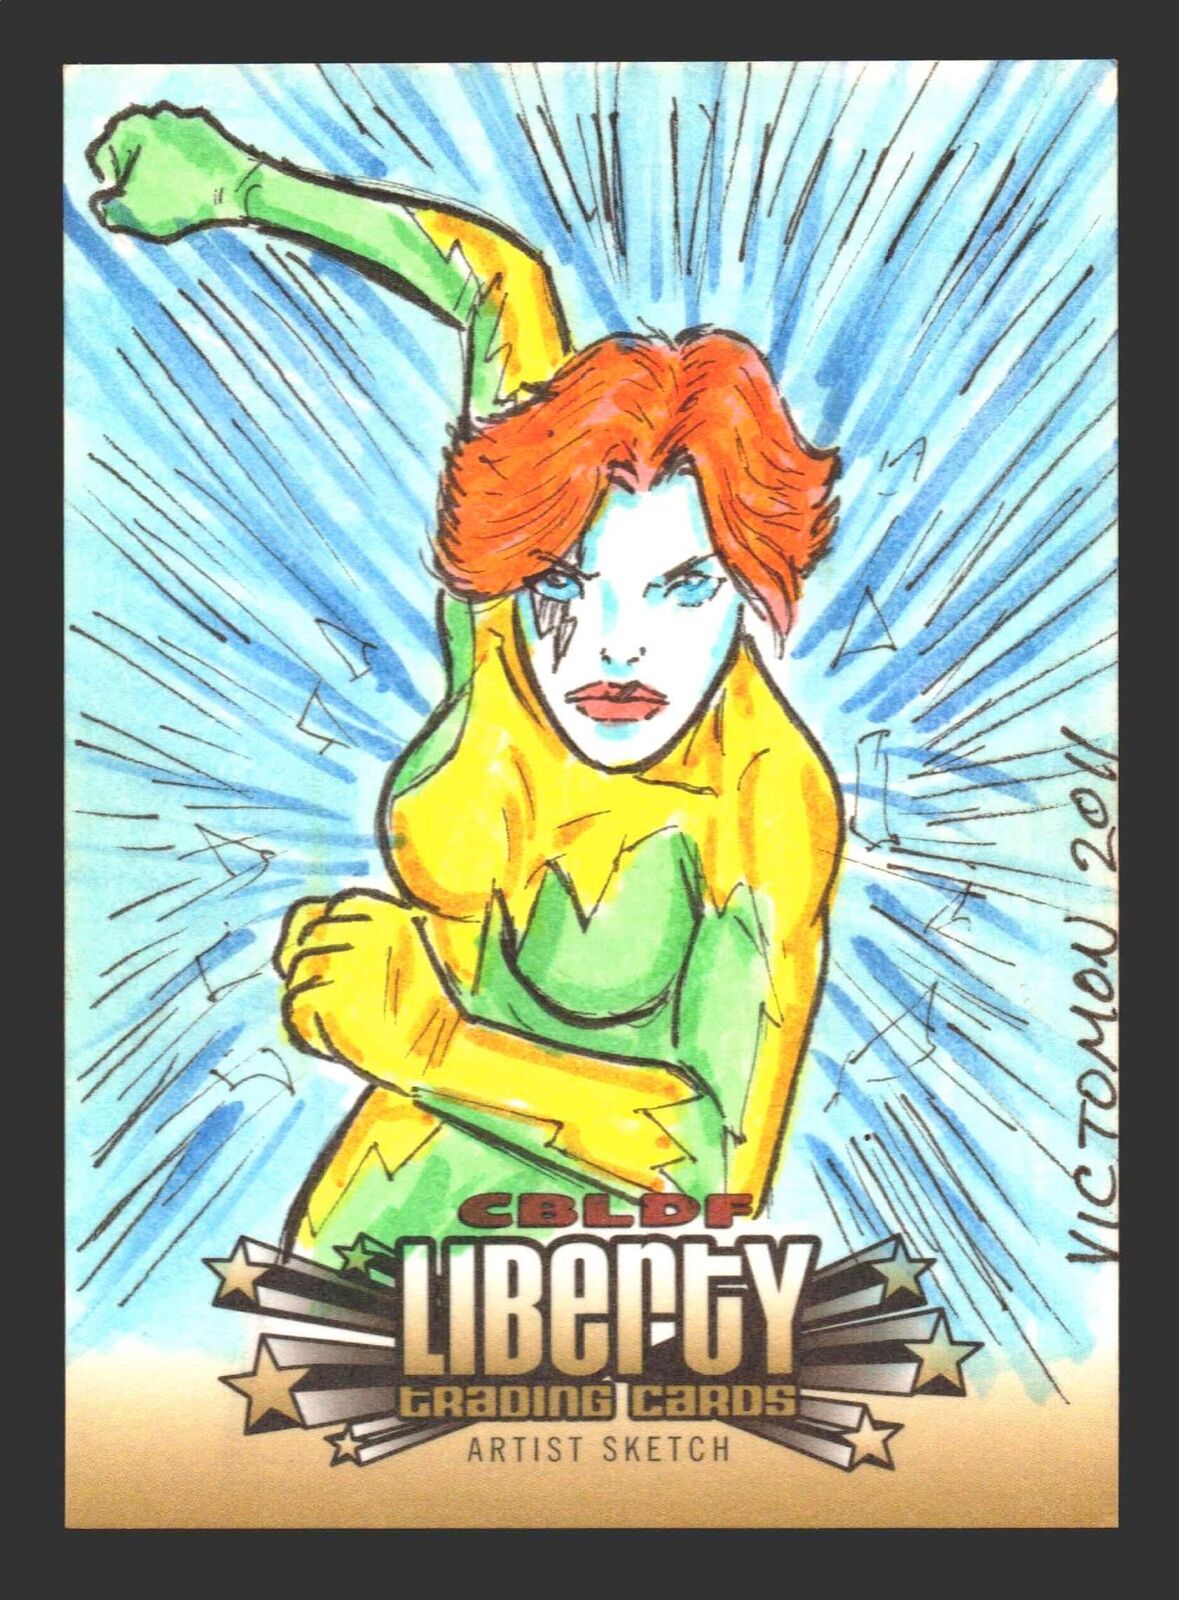 2011 Cryptozoic CBLDF Liberty Artist Sketch Card by Victor 